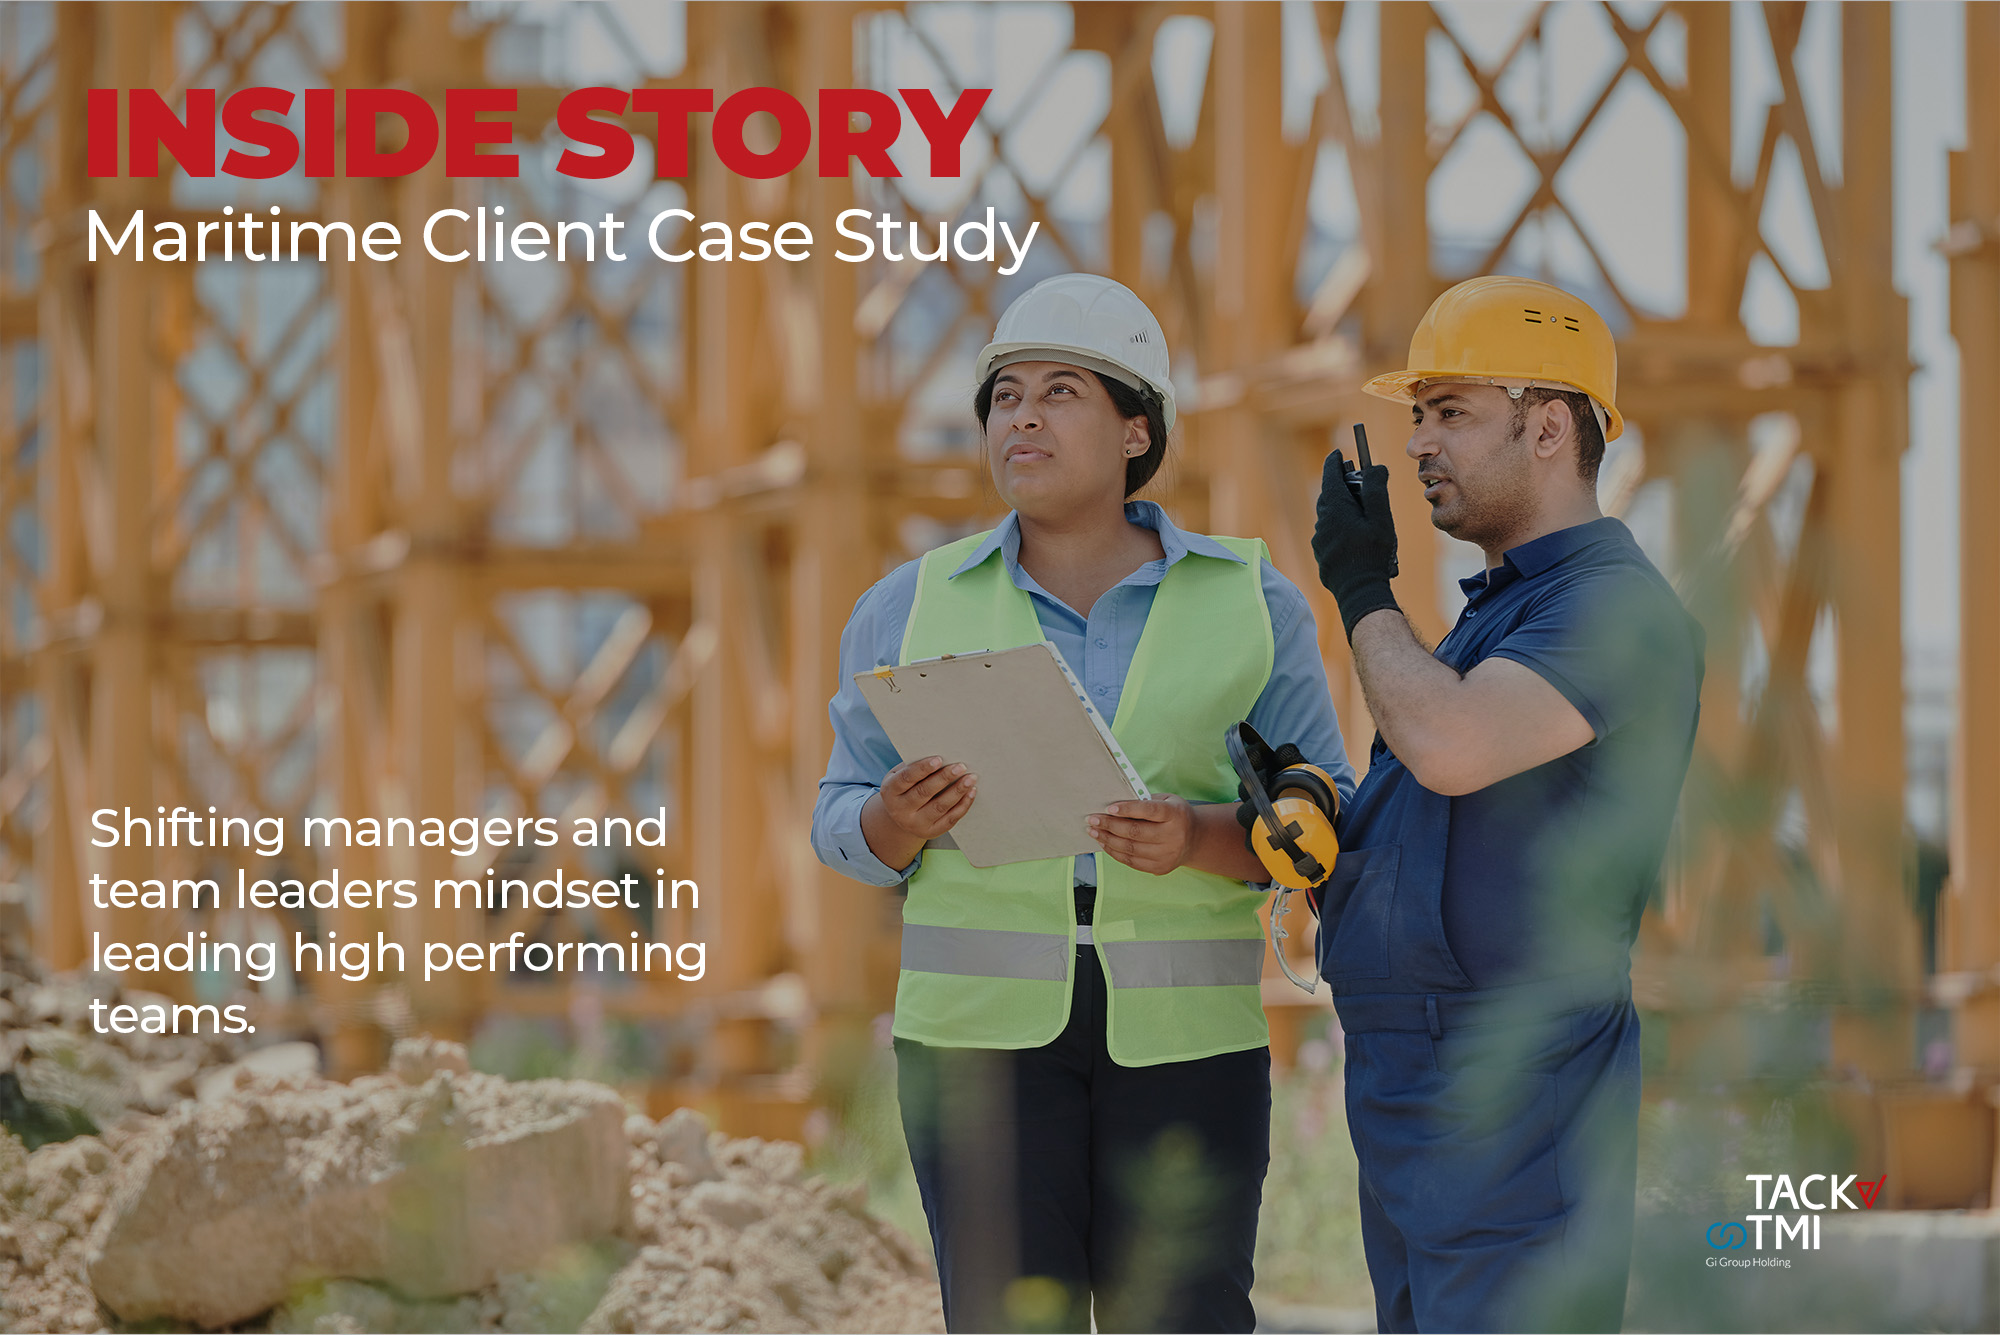 A case study snippet of Tack TMI's maritime client